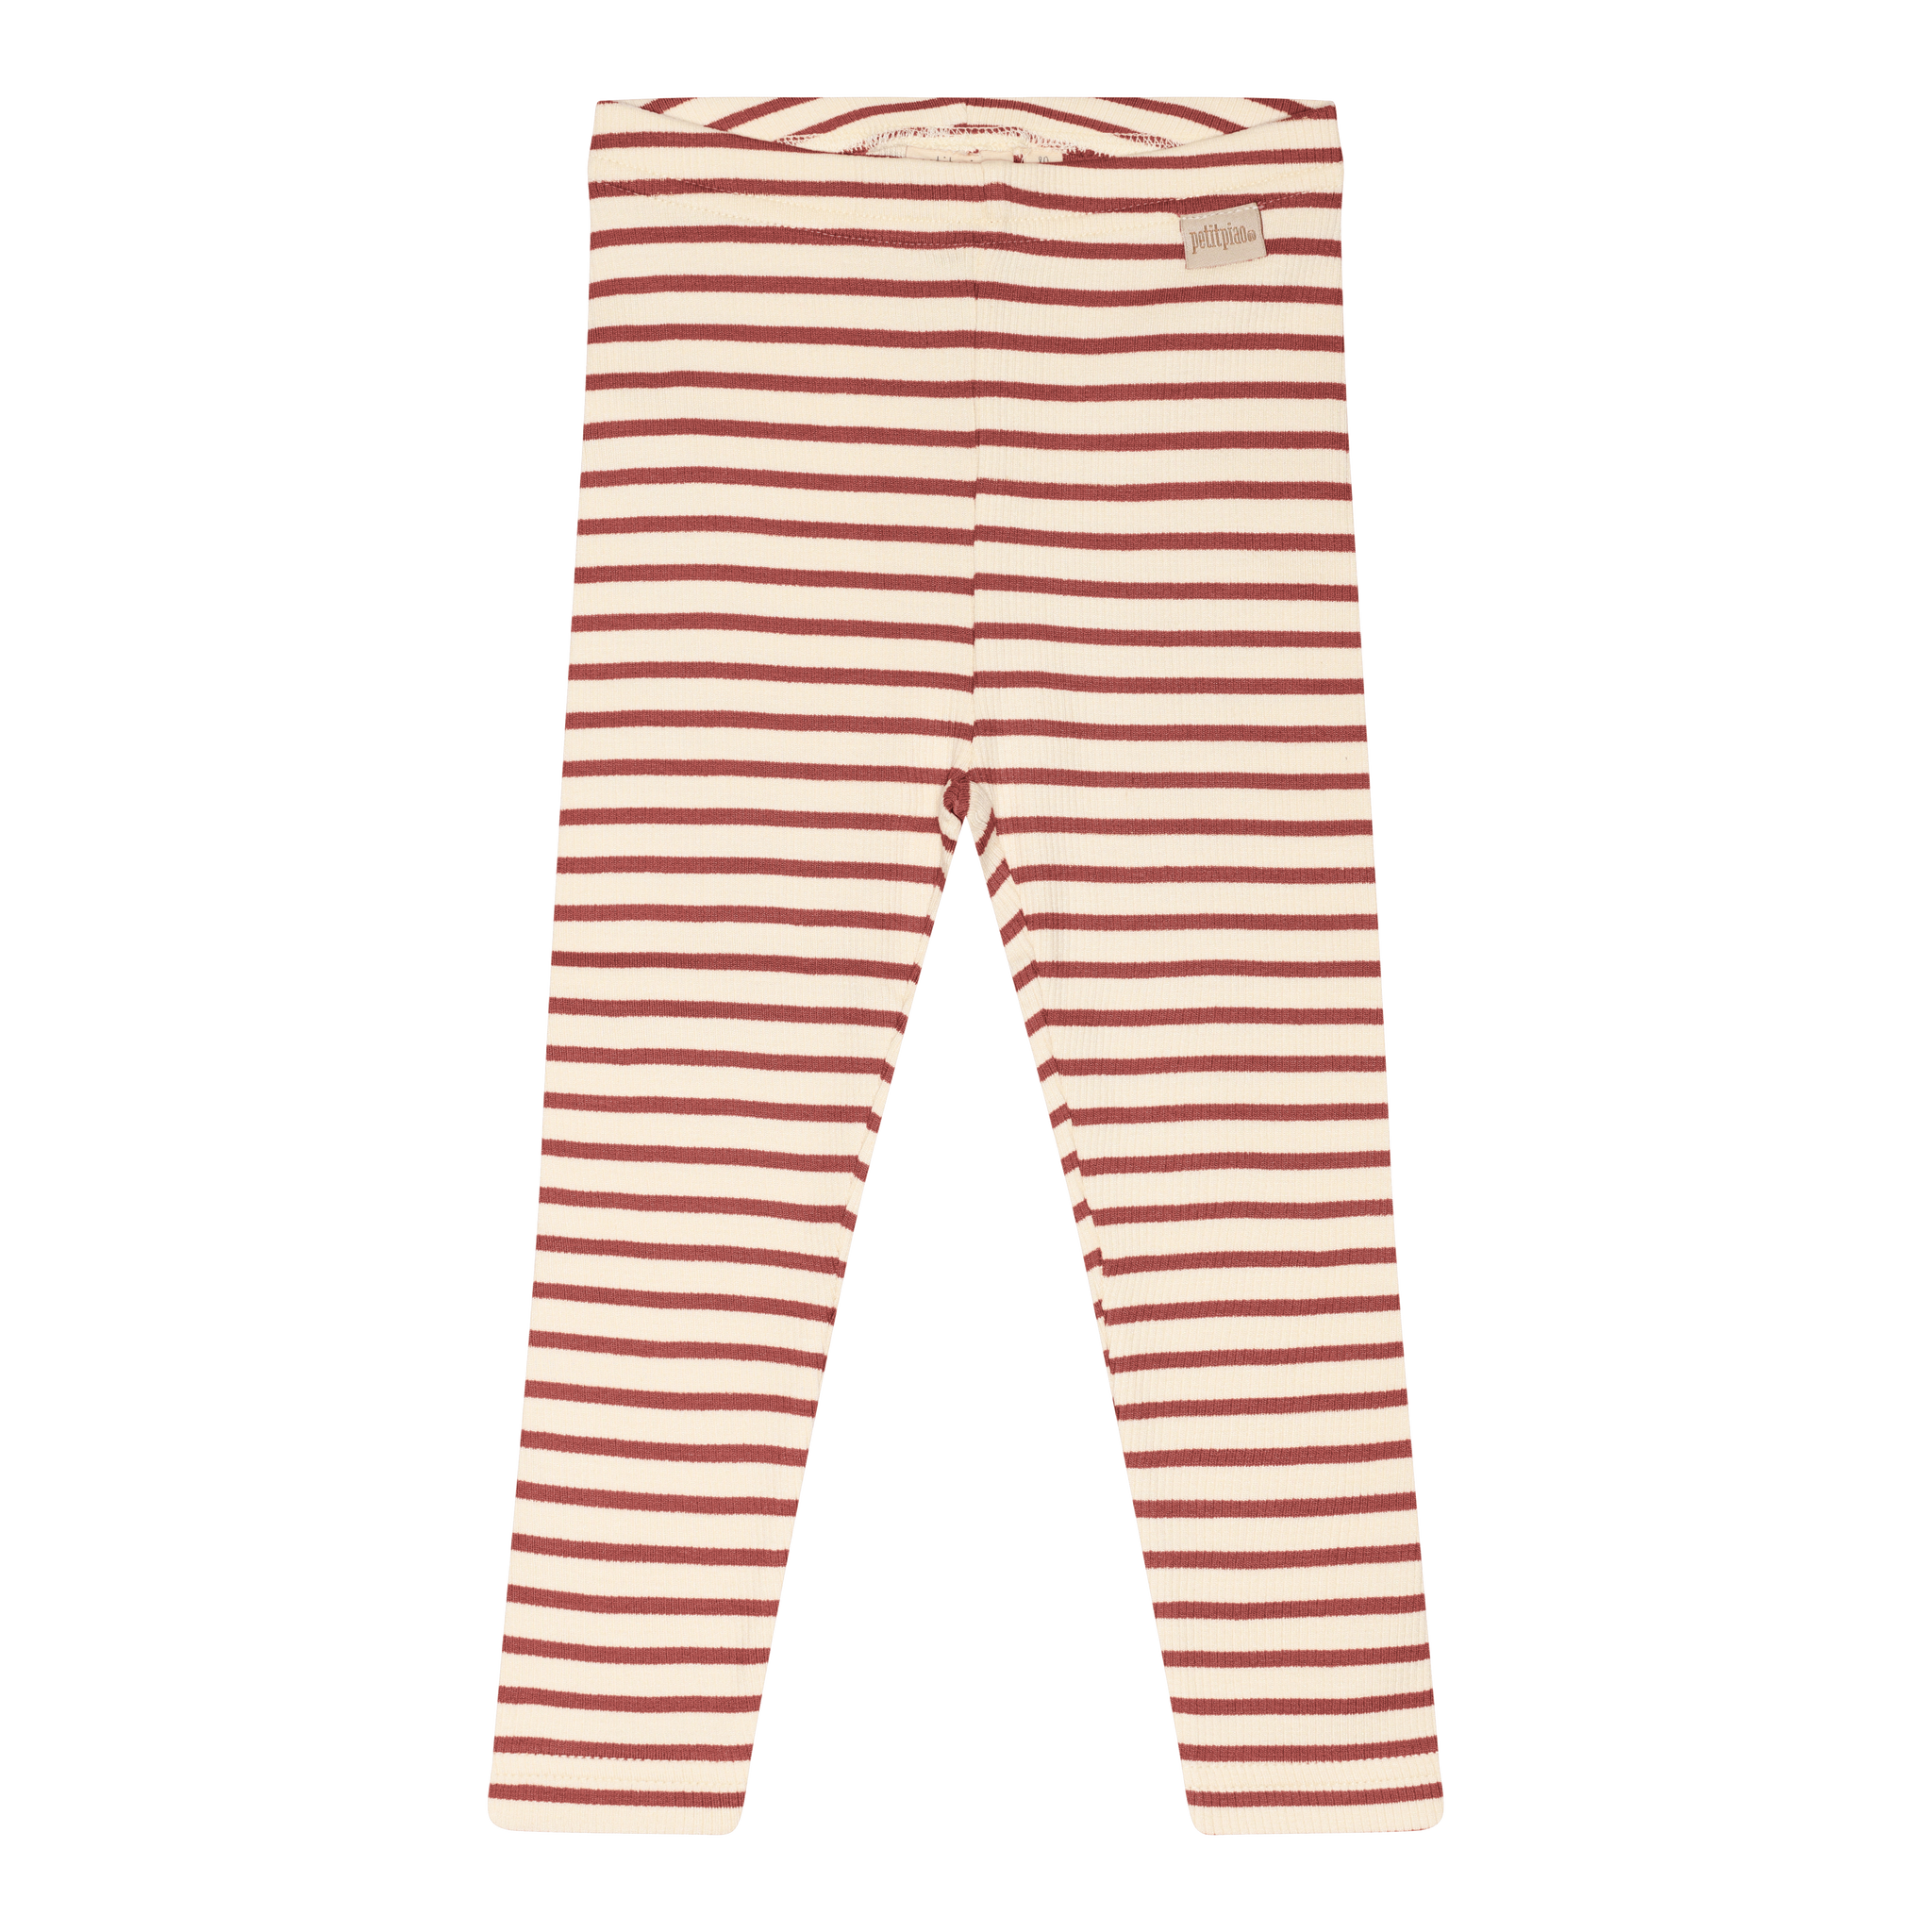 Petit Piao - Legging Modal Striped, PP302 - Berry Dust / Offwhite